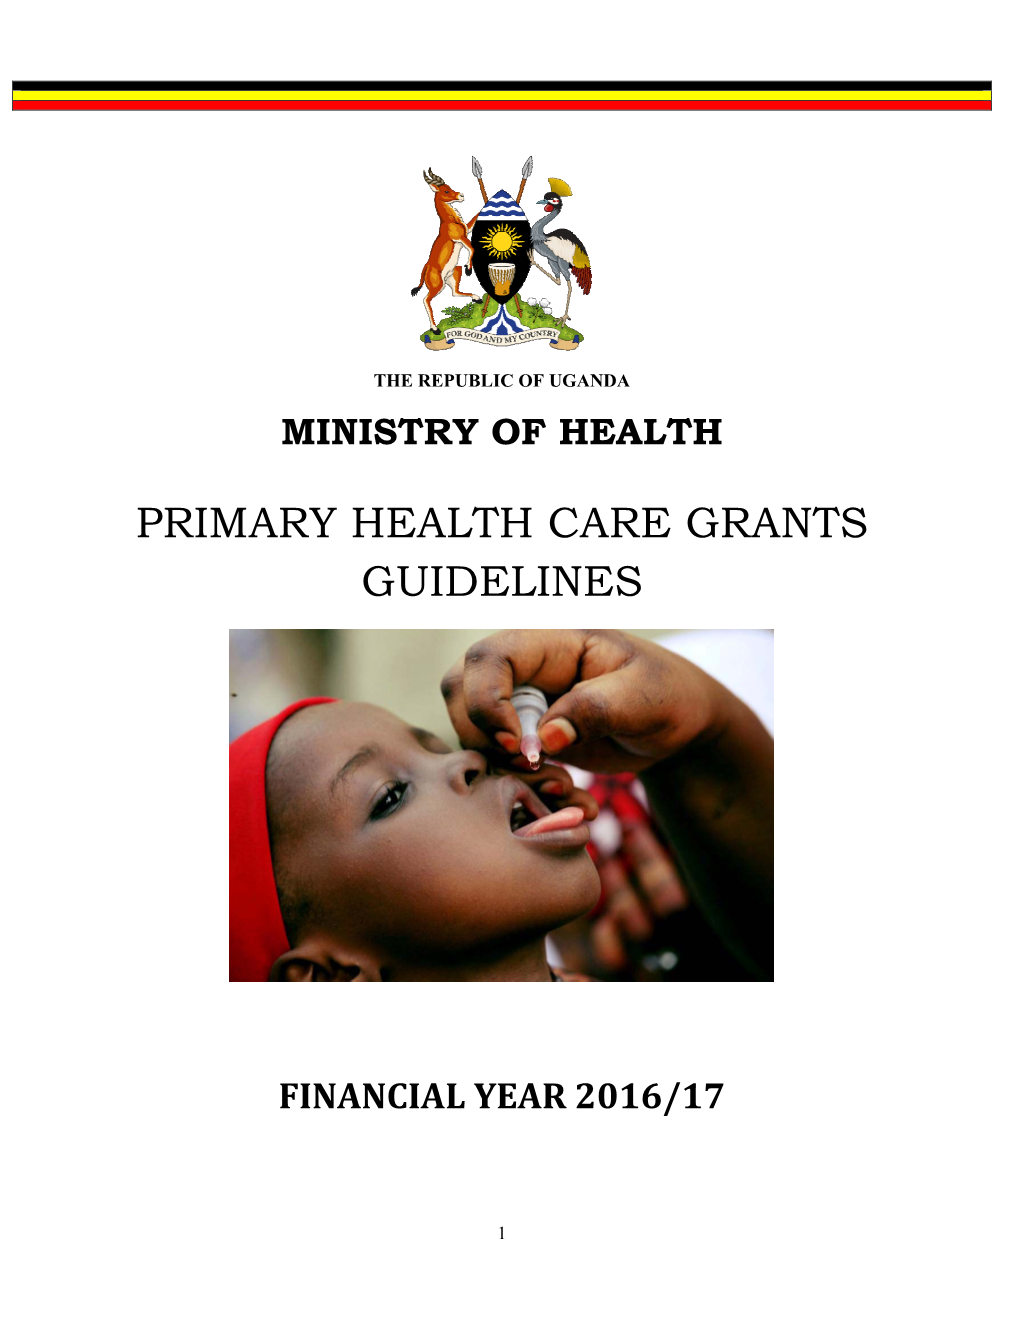 Primary Health Care Grants Guidelines